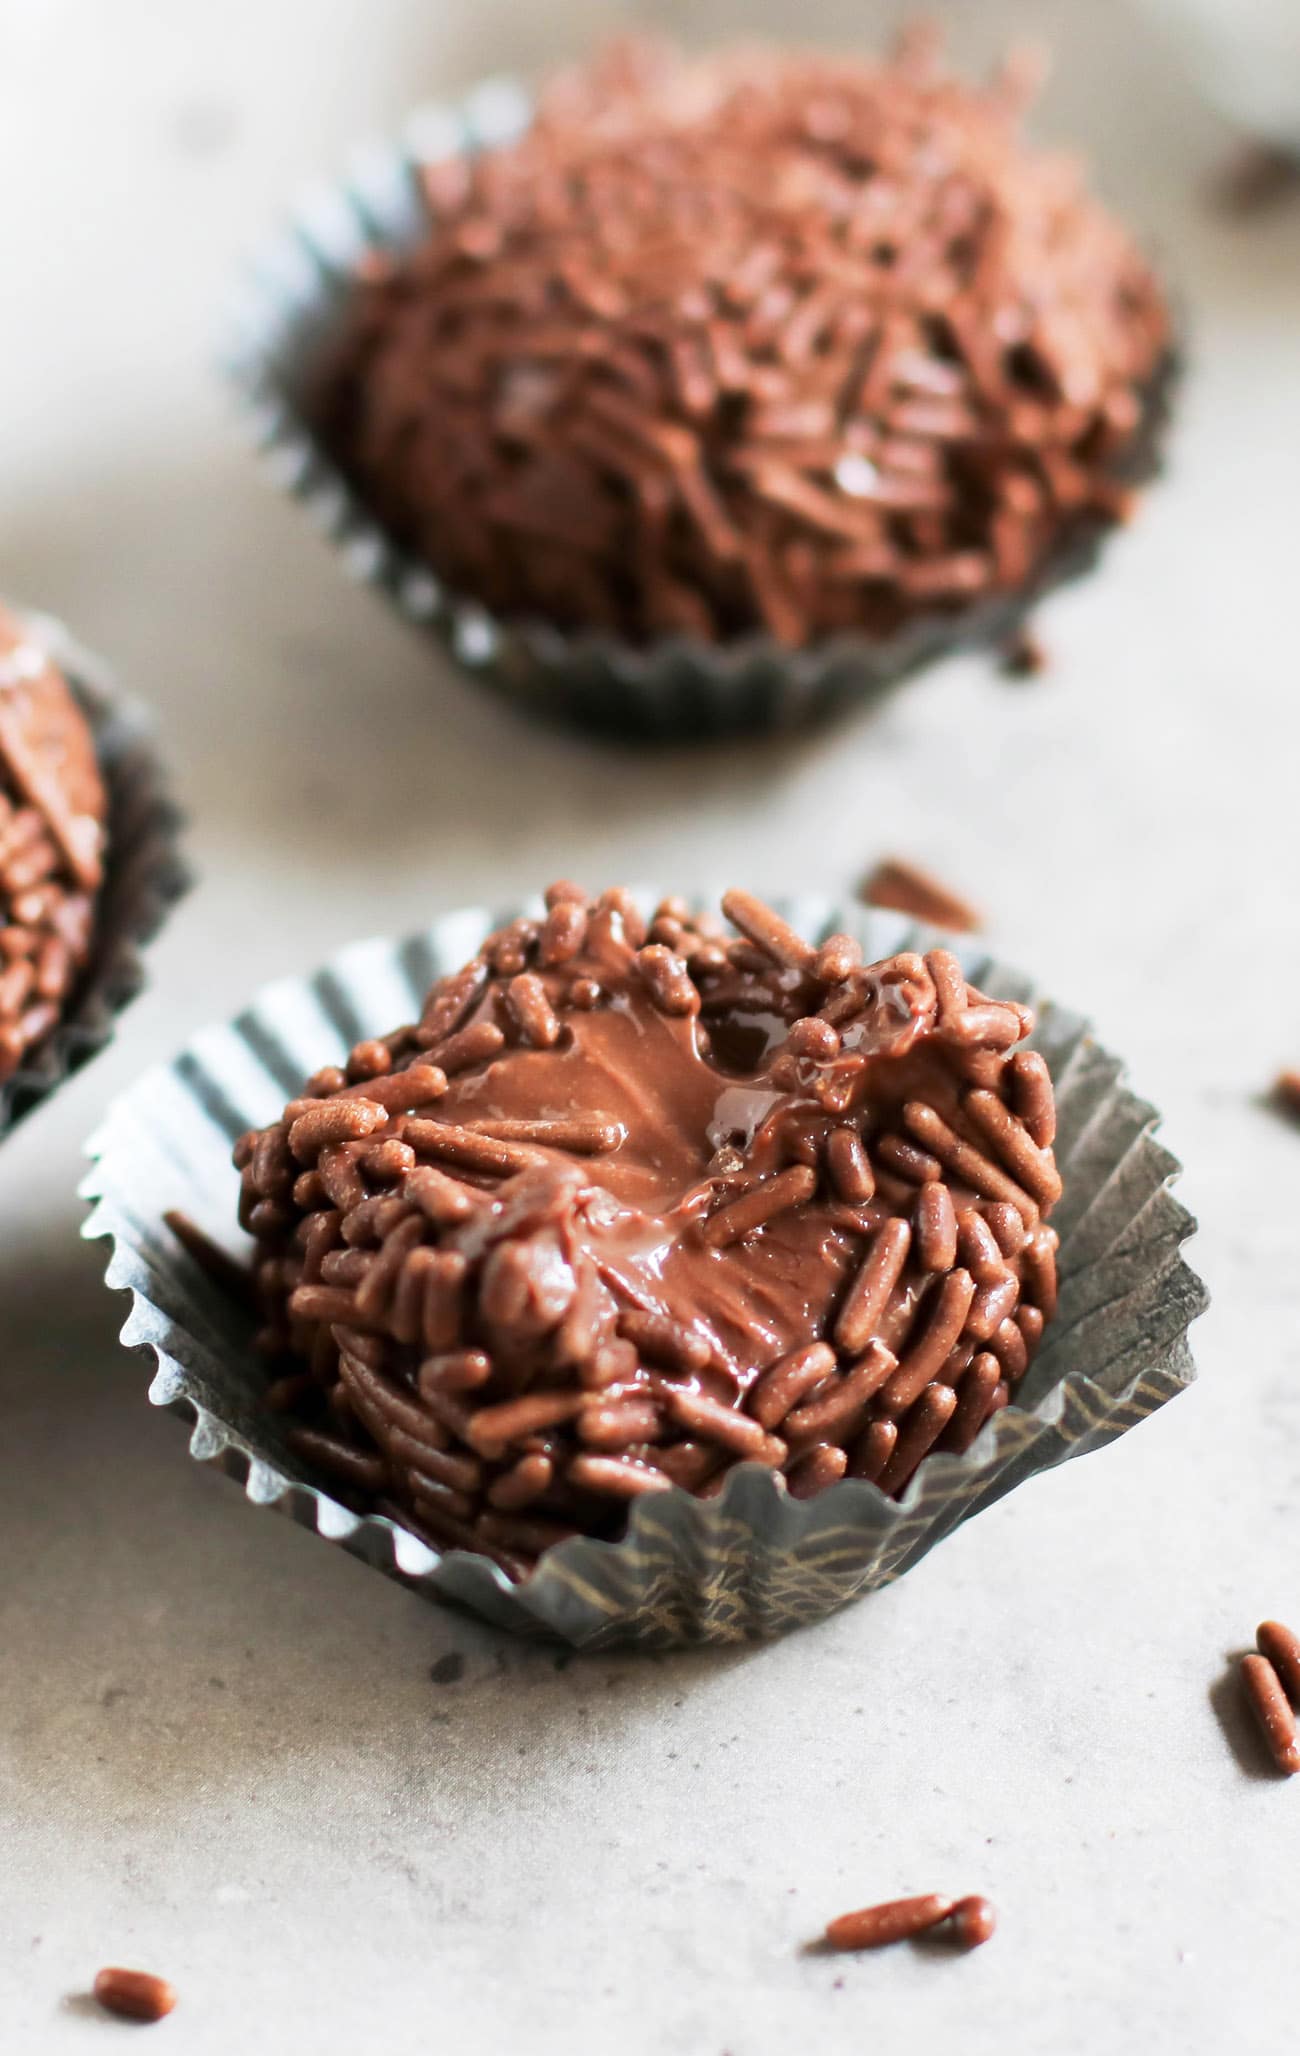 These Healthy Brigadeiros are ULTRA fudgy, smooth, and creamy, with a slight crunch from the chocolate sprinkles. The taste is SPOT ON! You'd never guess that these Brazilian chocolate truffles are made with healthier ingredient swaps to make them lower in calories, fat, and sugar compared to the original.